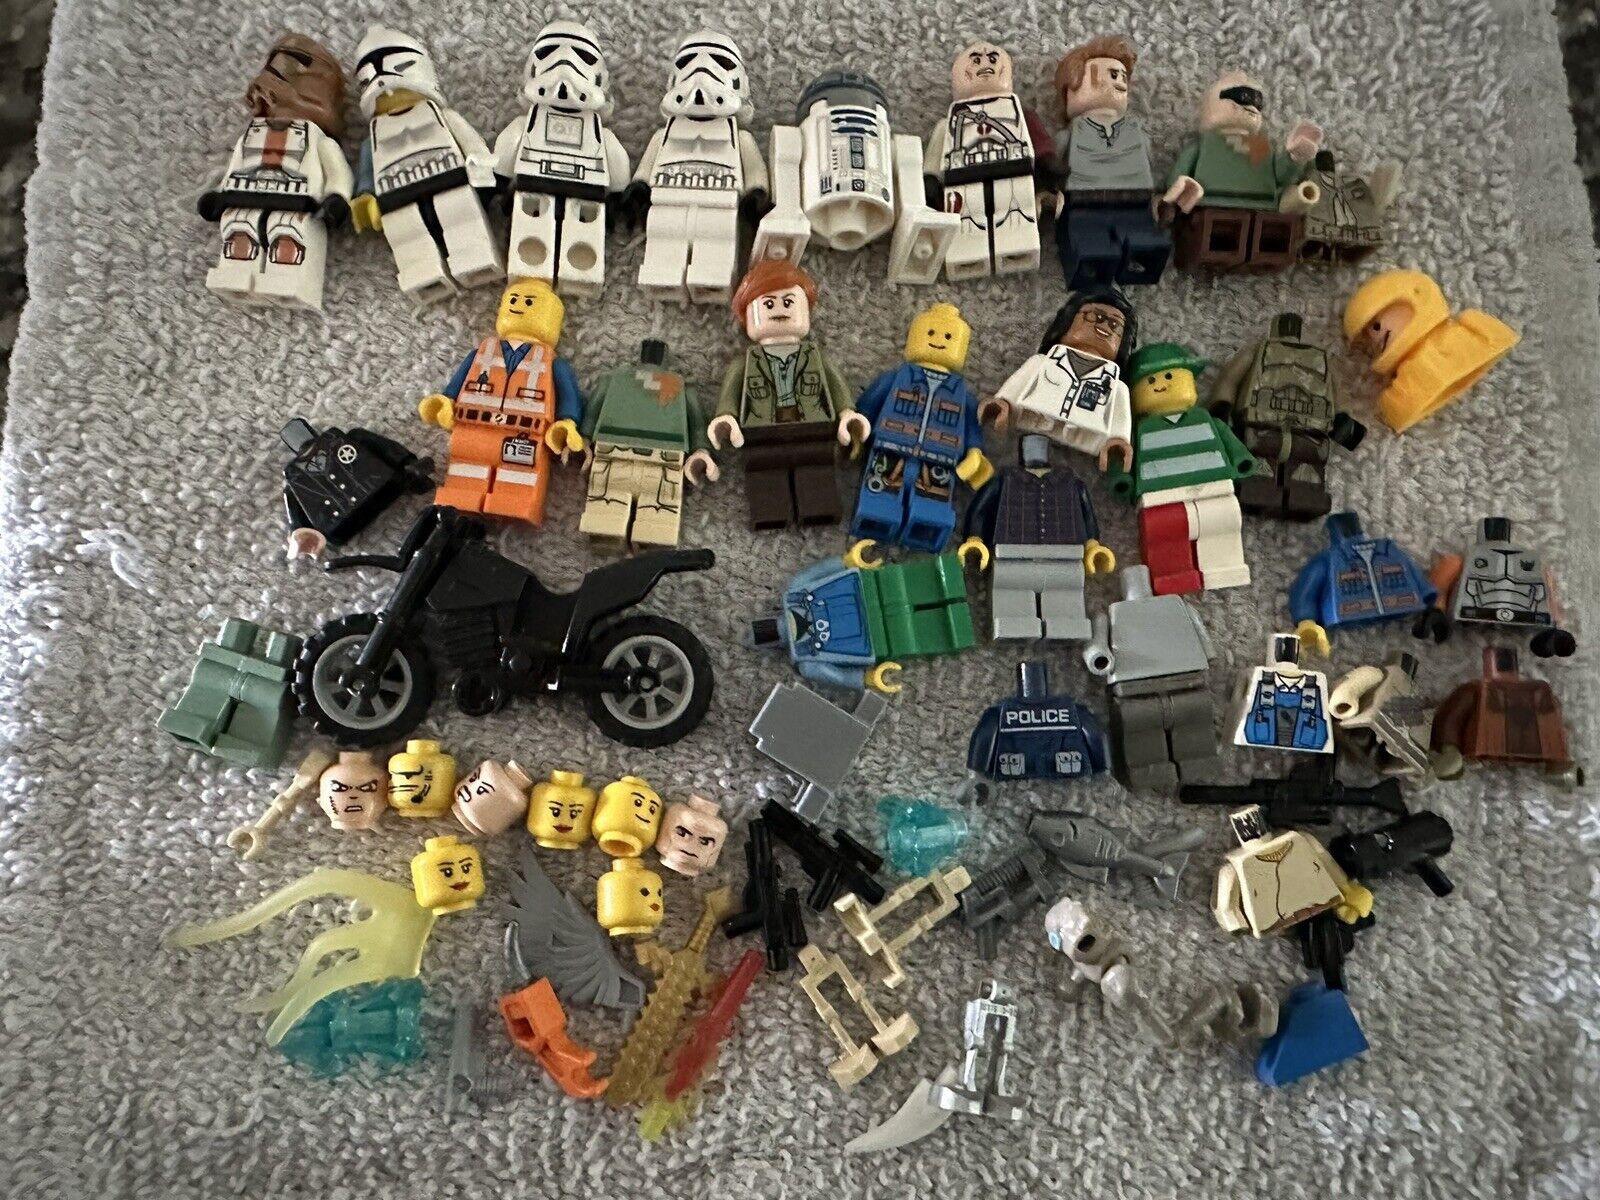 Lego Star Wars, Jurassic Park, Misc Mini Figures with Accessories and Parts